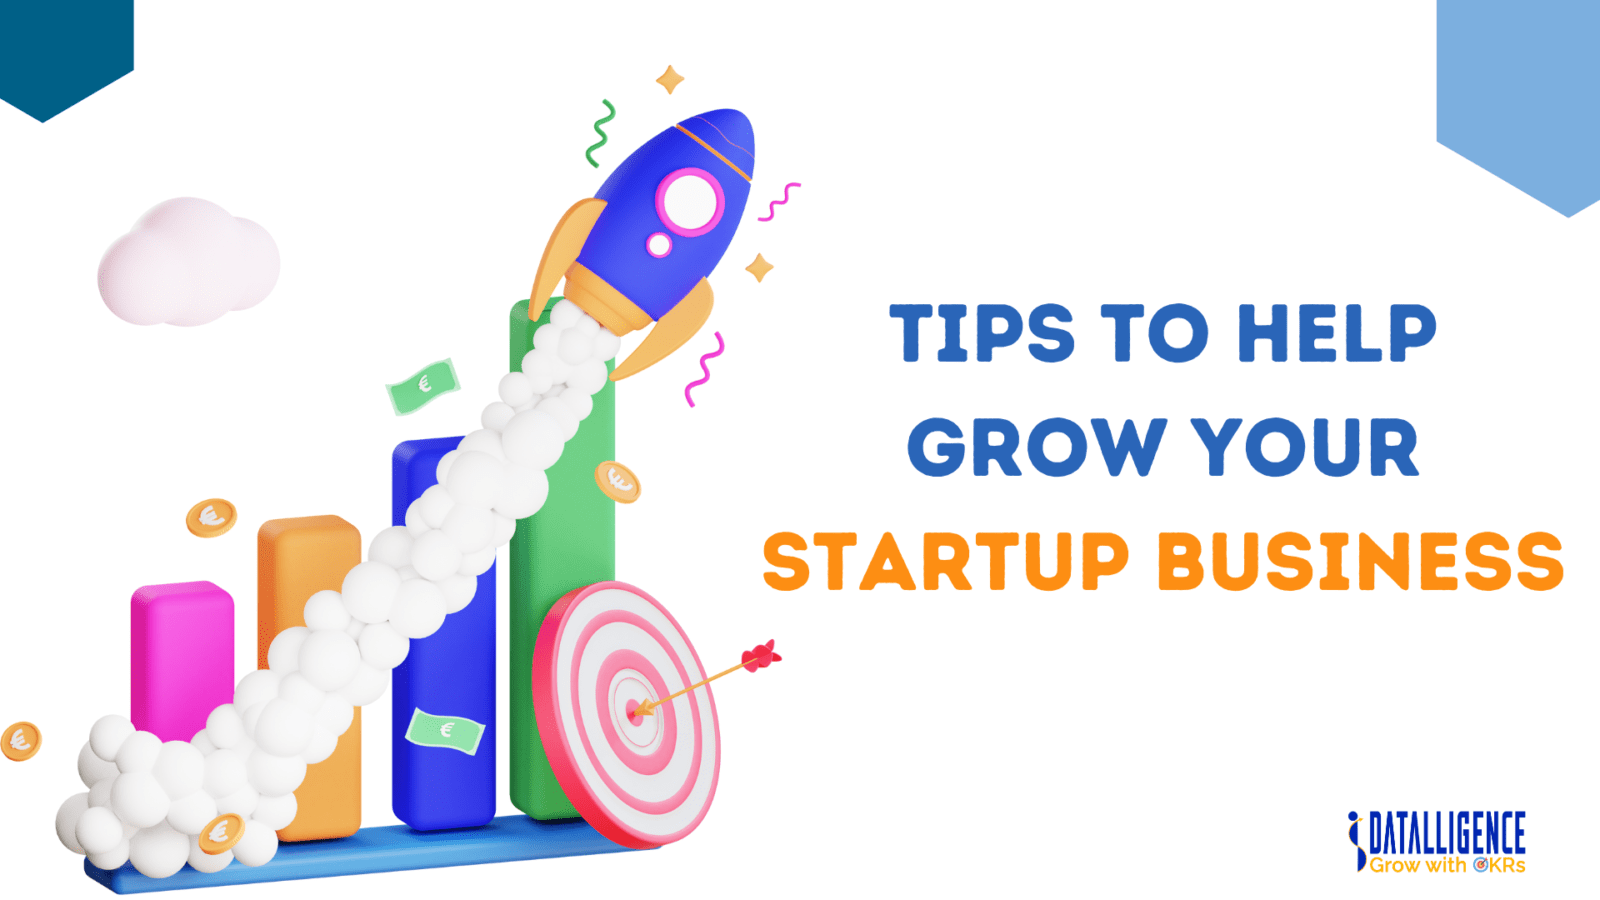 Tips to Help Grow Your Start-up Business